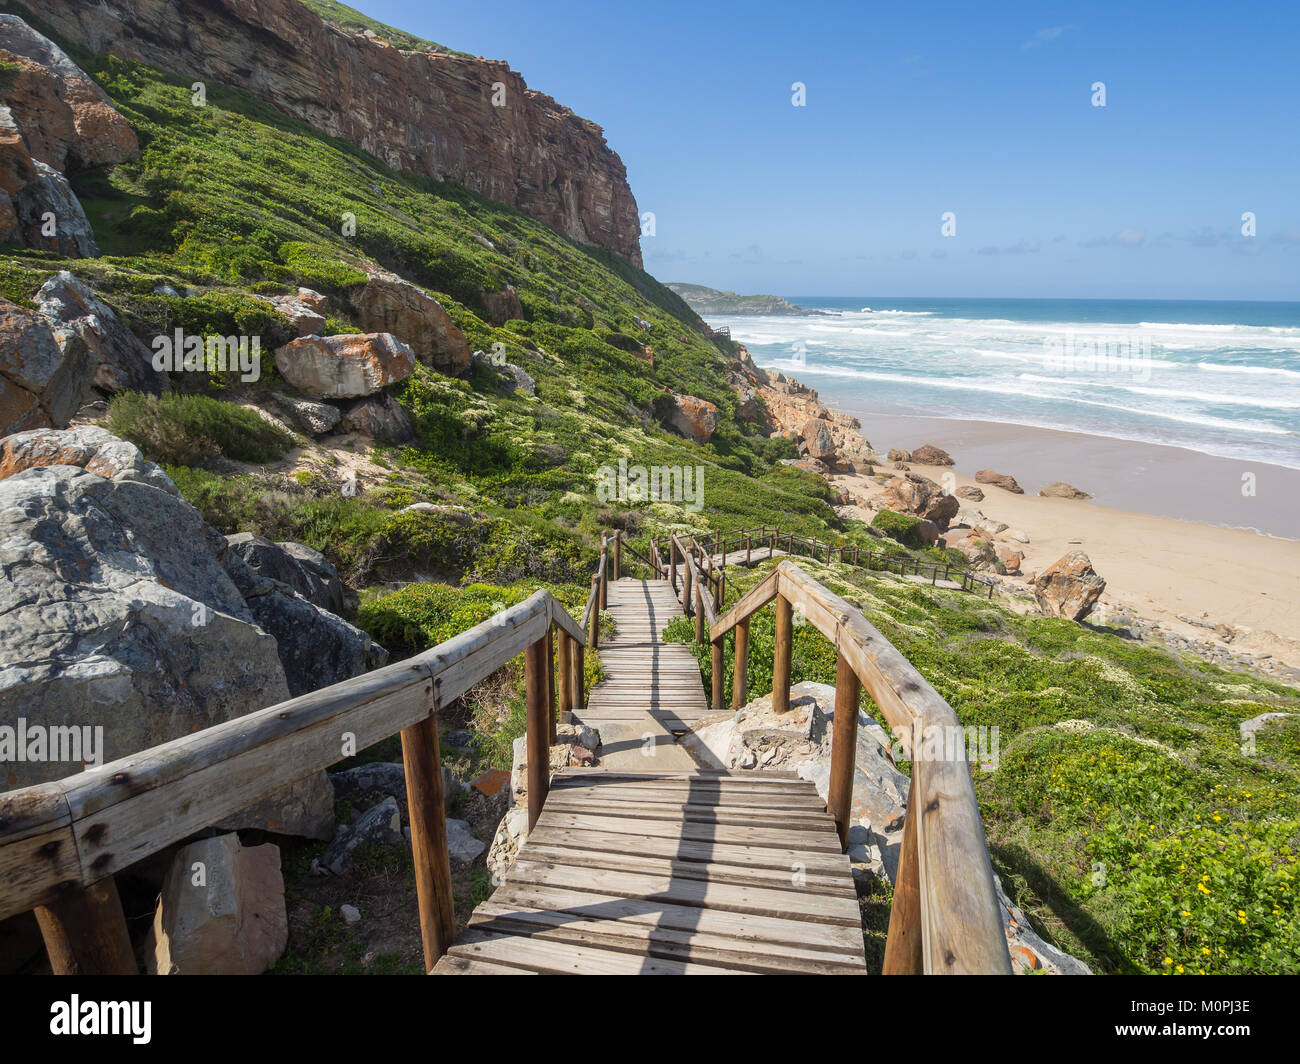 Garden Route - Robberg Nature Reserve - Wooden walkway leading down to beautiful beach and ocean on Robberg Island Stock Photo